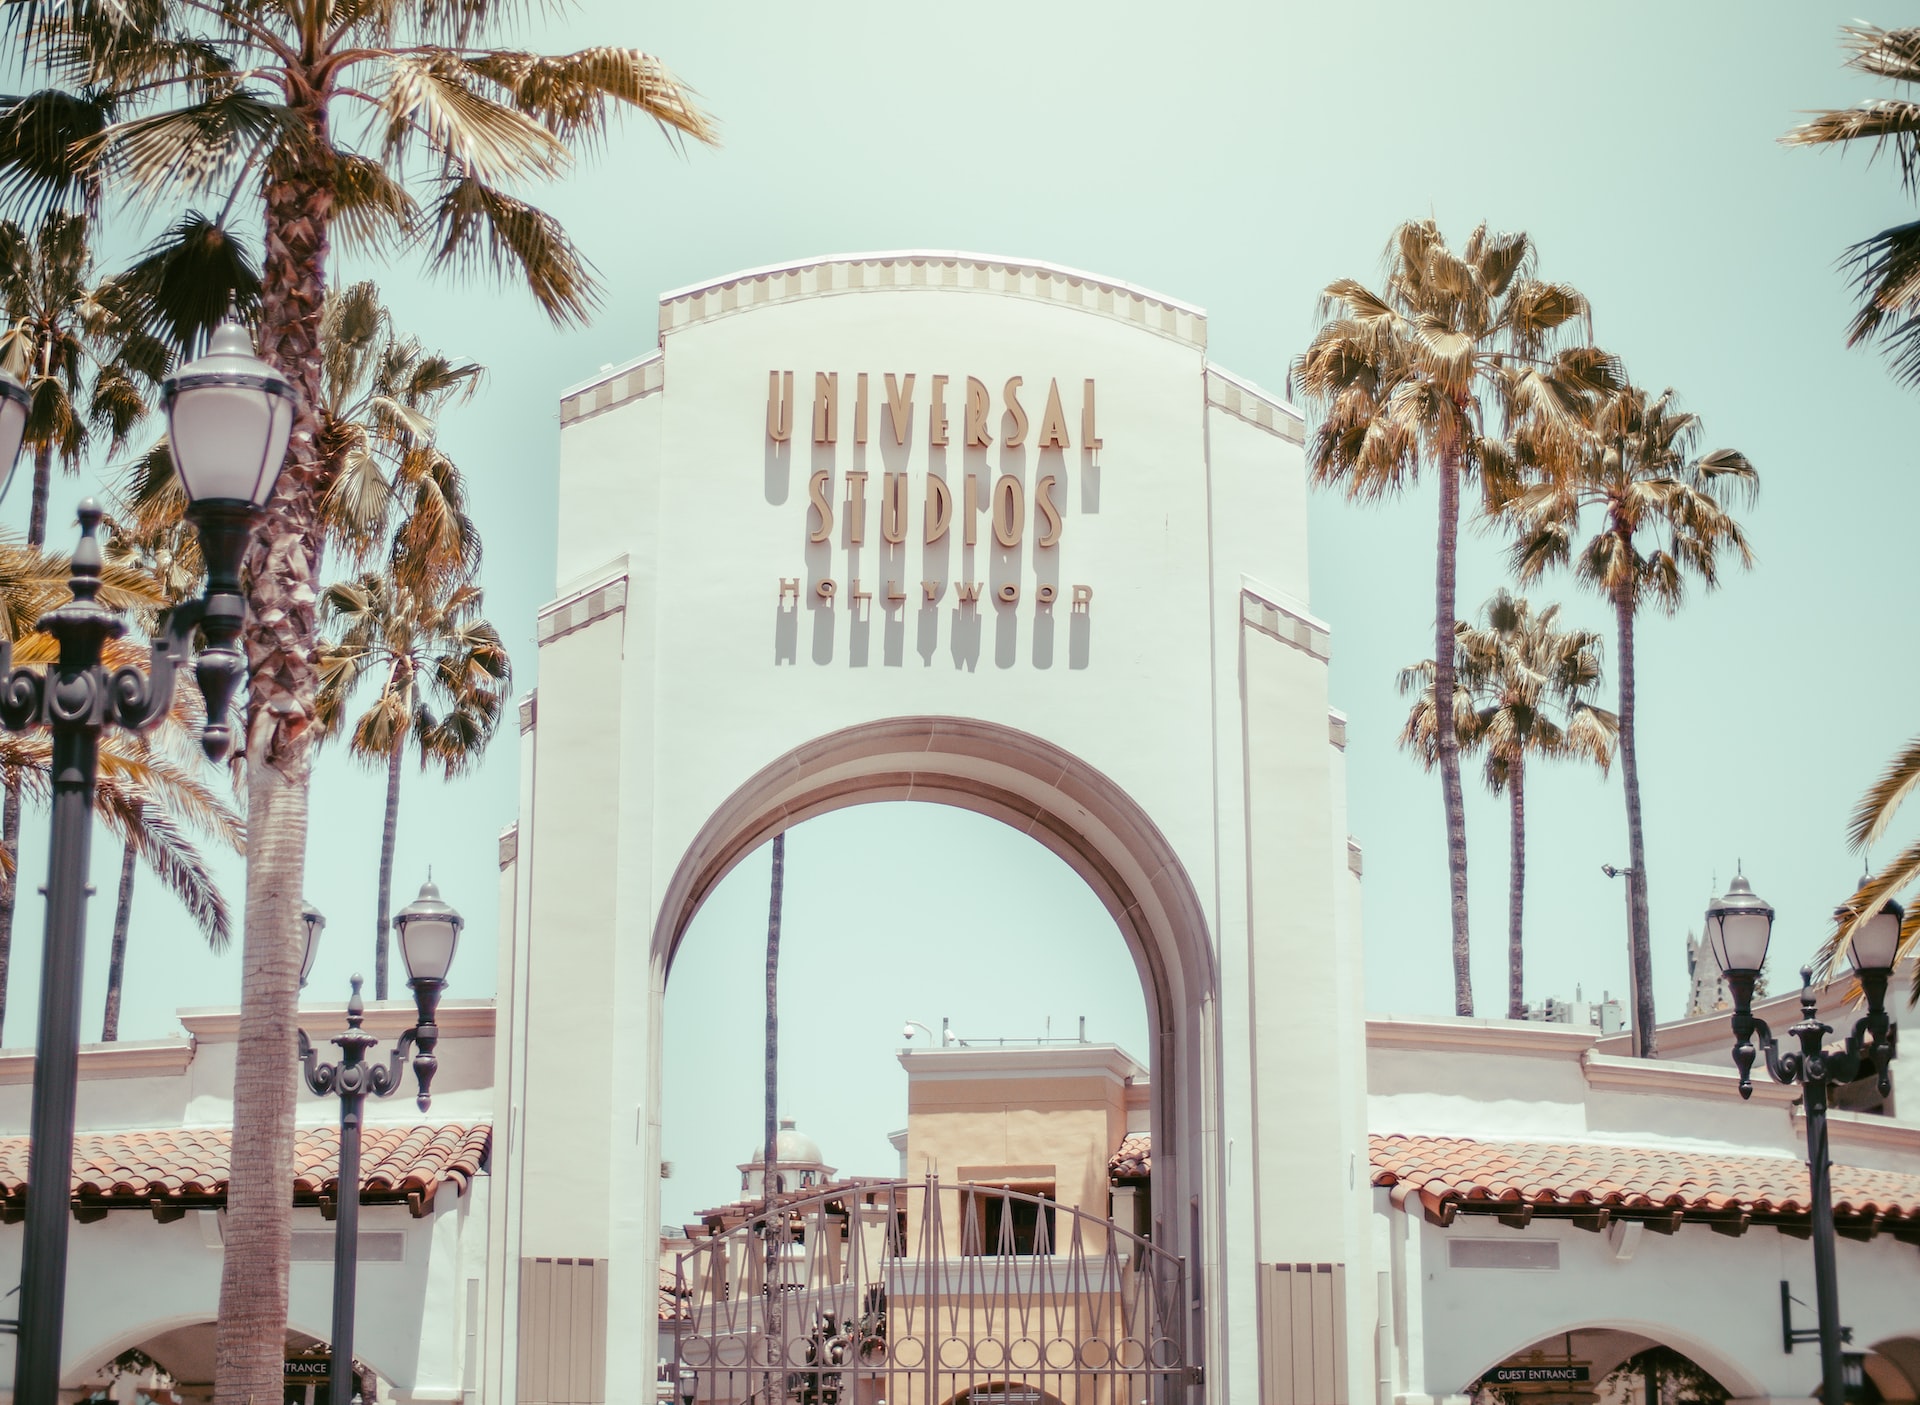 Entrance to Hollywood's Universal Studios in North Hollywood on a sunny California day.